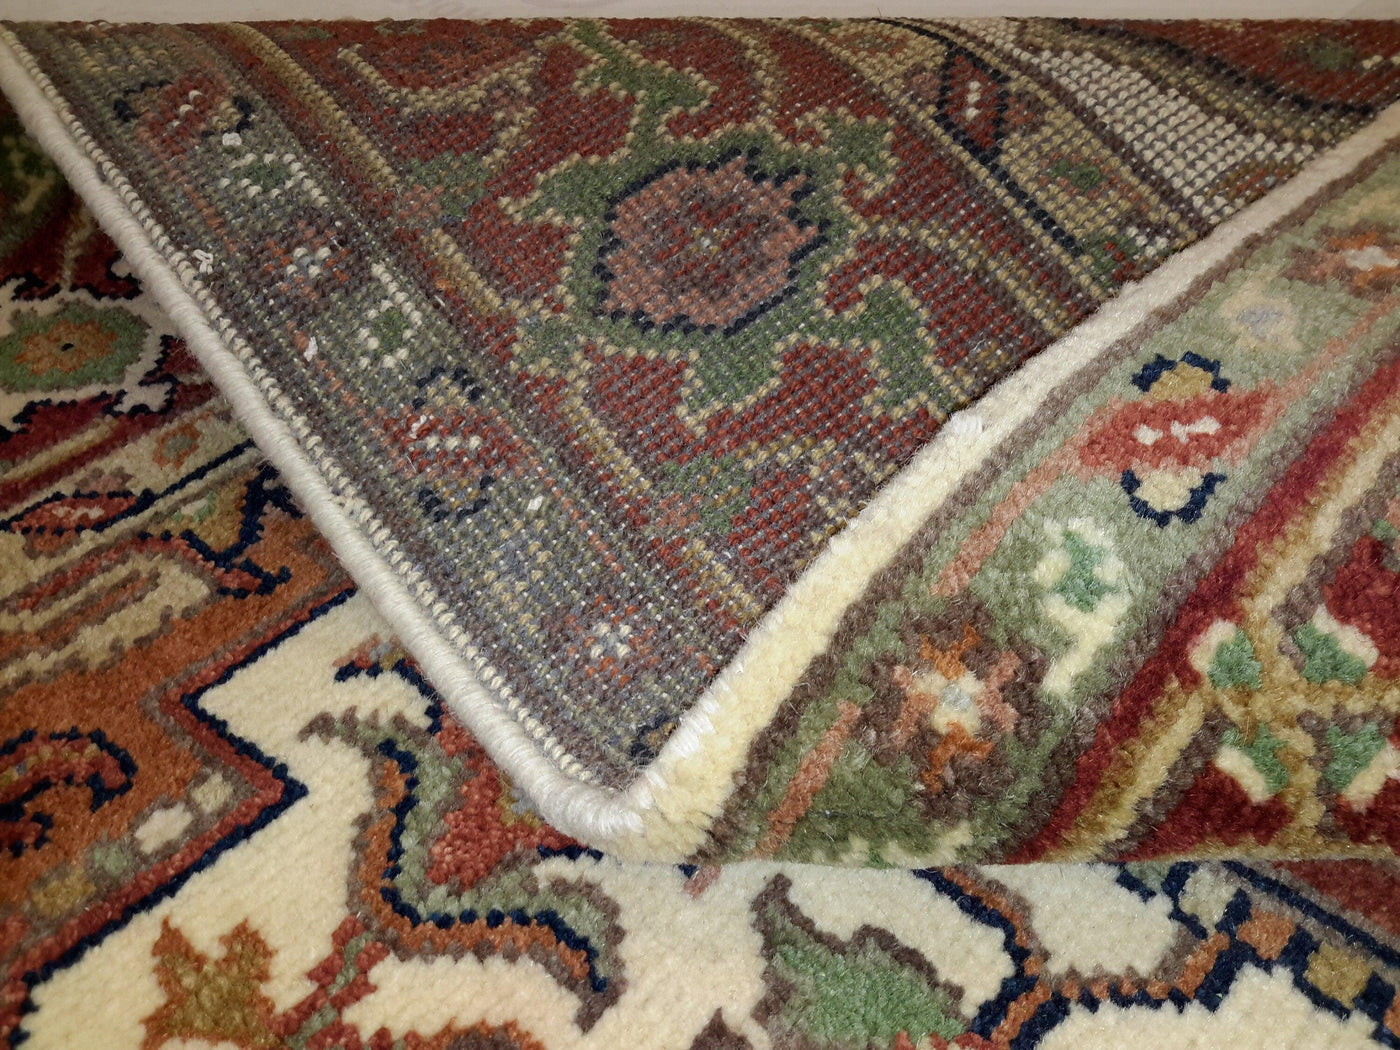 Handmade Hand knotted Traditional Orange Medallion Indo Serapi Transitional Oriental Premium Wool Area Rug for Living Room - 5'11'' X 8'11''